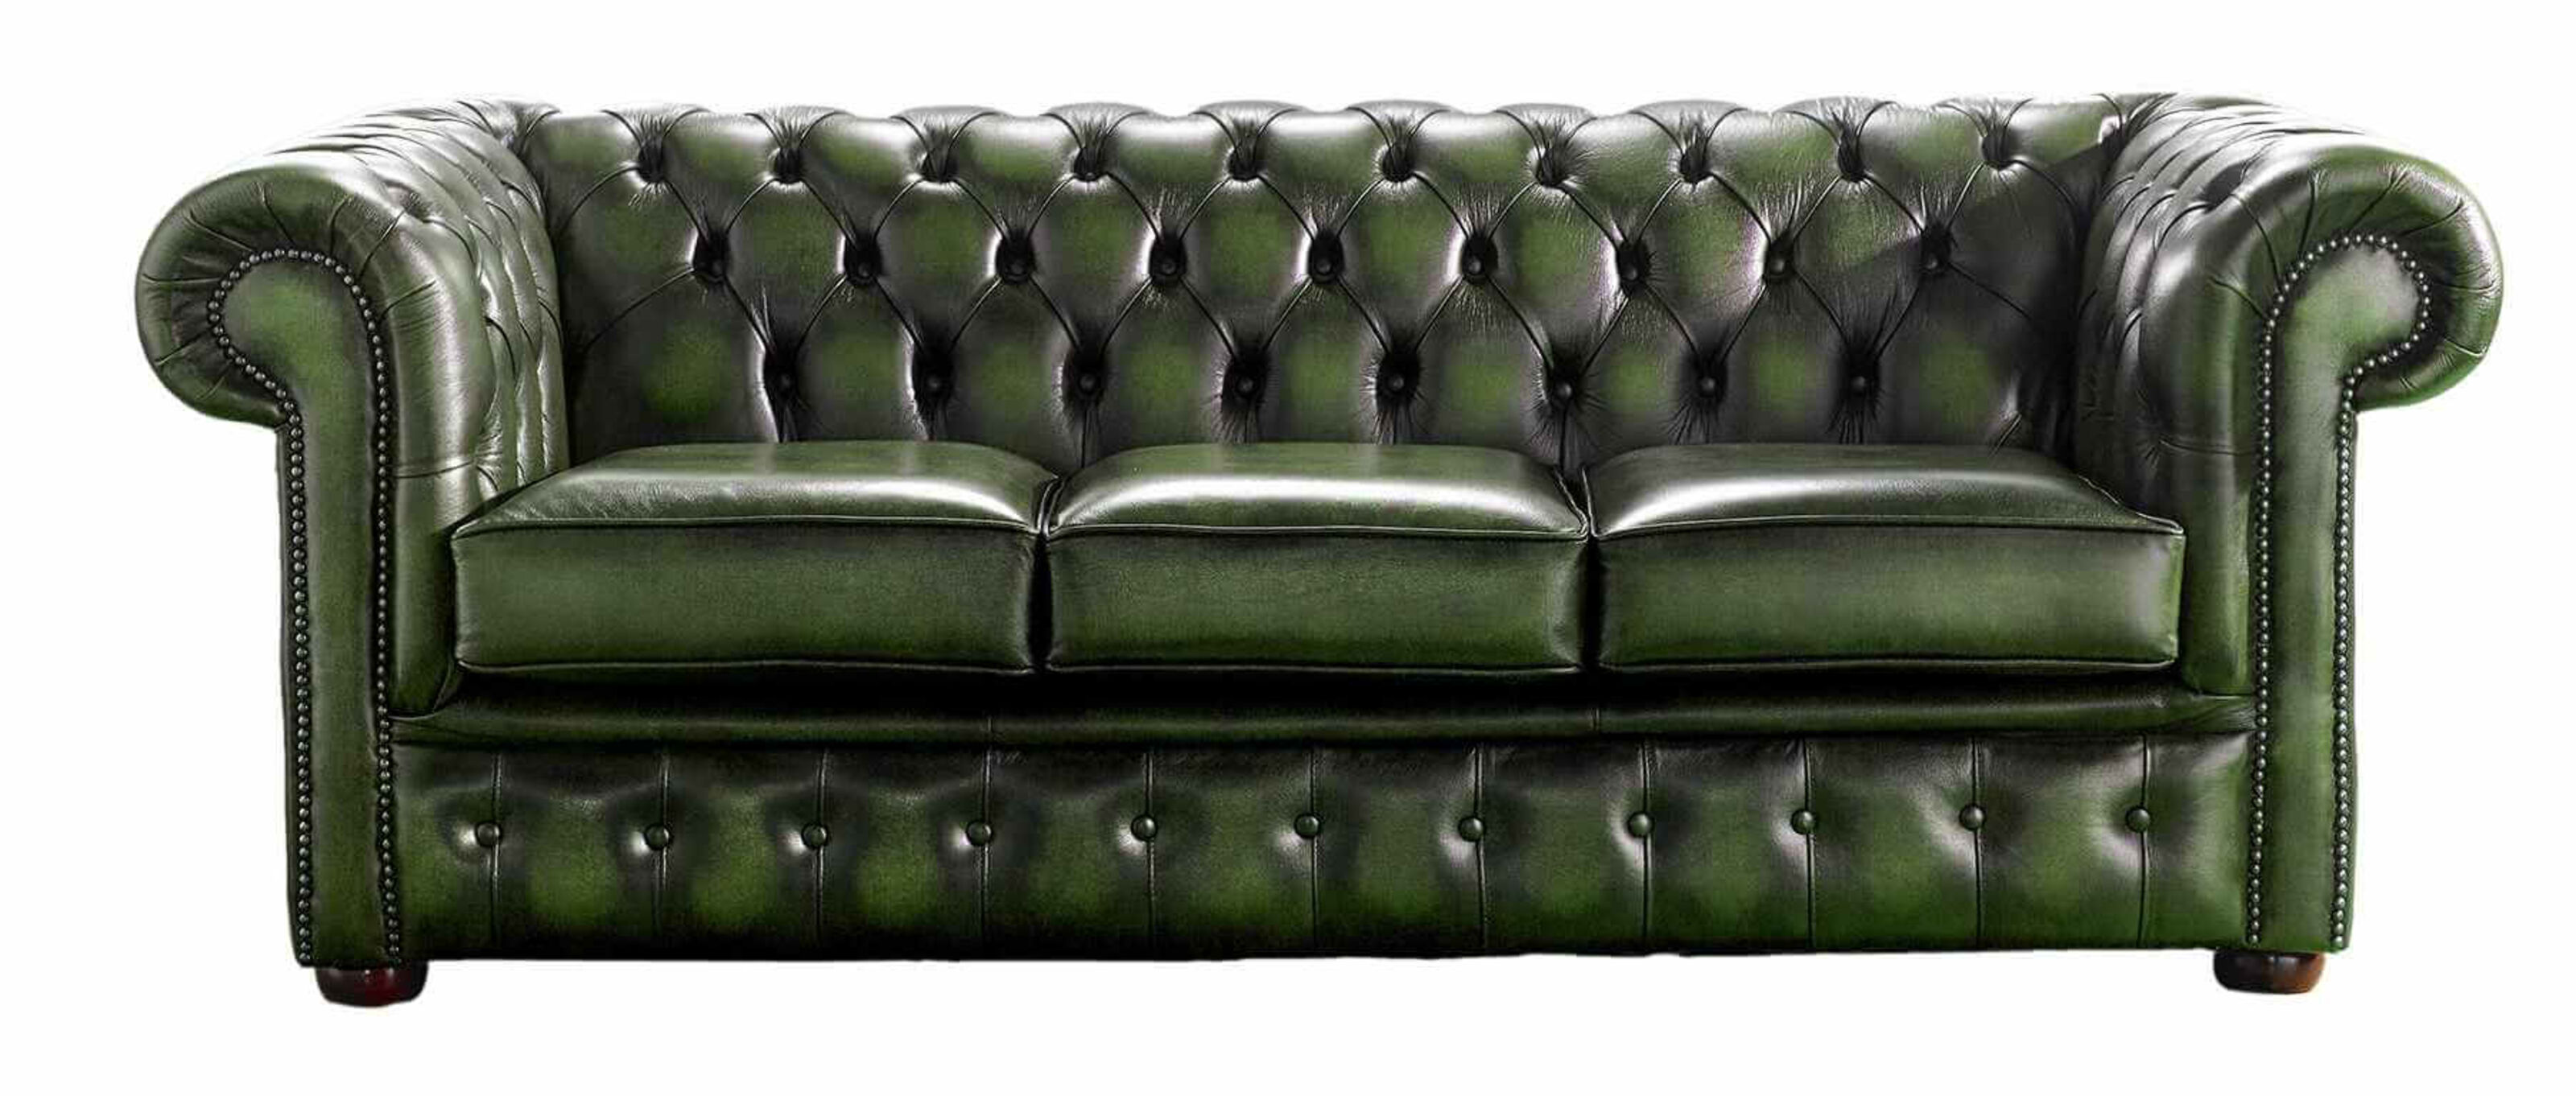 Discover Luxurious Chesterfield Sofas in Kent  %Post Title